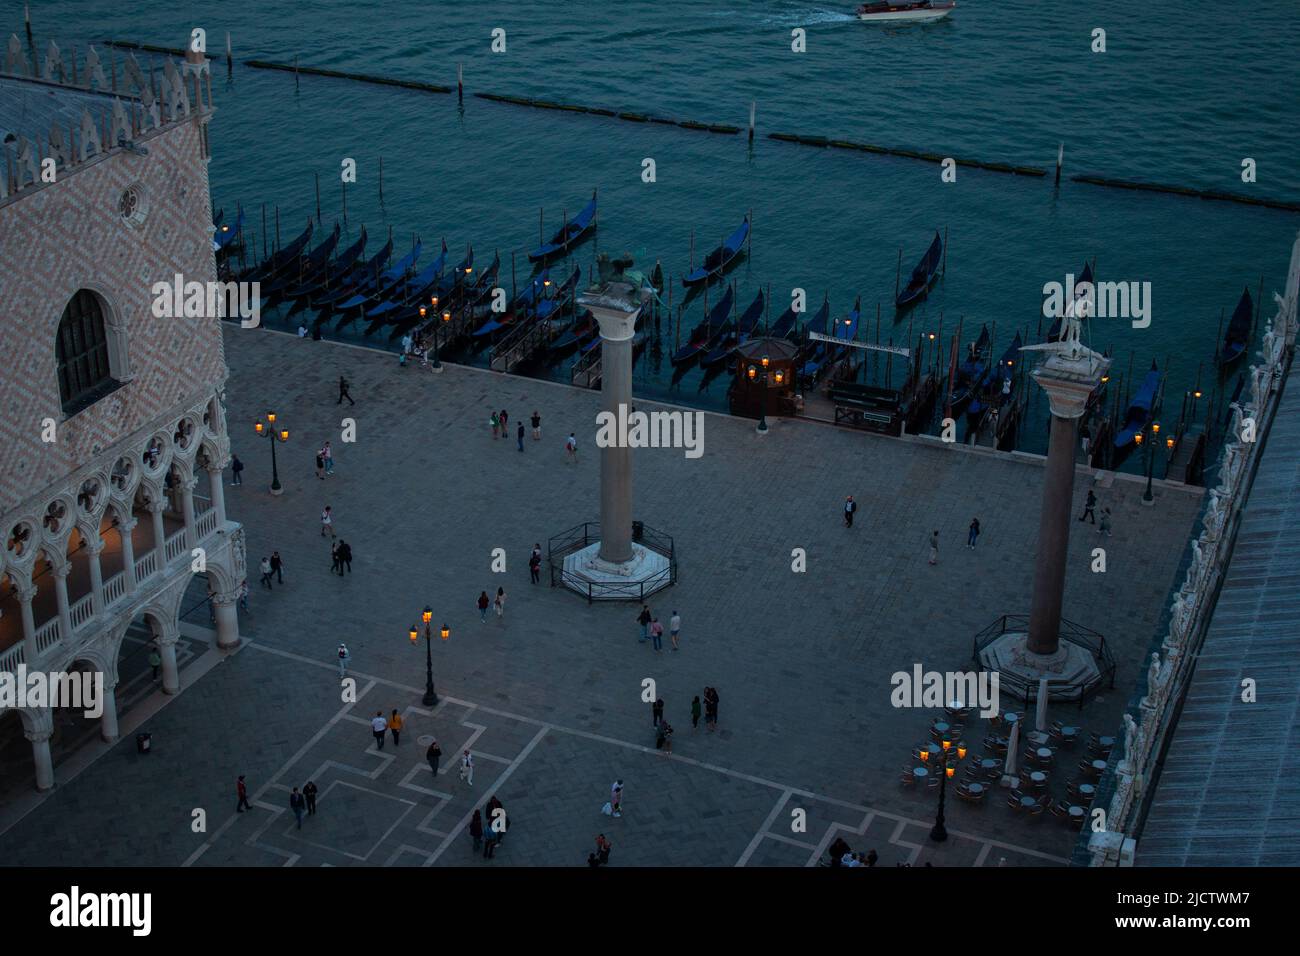 Gondolas along the Doge’s palace and Piazzetta San Marco, the view from Campanile di San Marco late in the evening, Venice, Italy Stock Photo